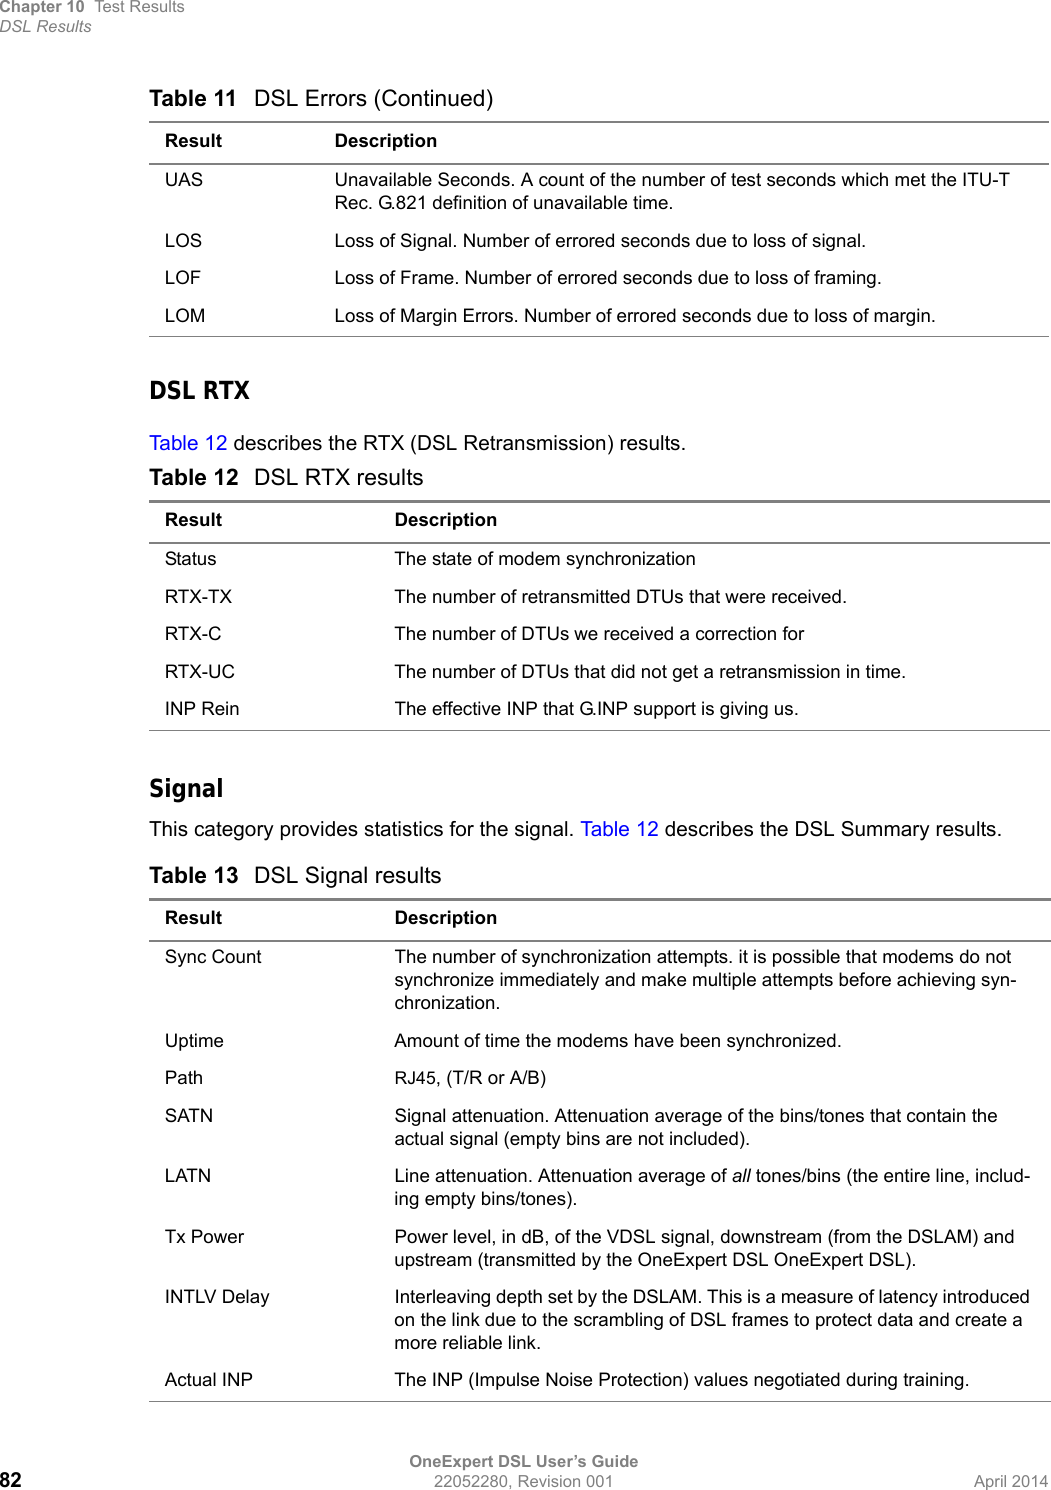 Chapter 10 Test ResultsDSL ResultsOneExpert DSL User’s Guide82 22052280, Revision 001 April 2014DSL RTXTab le 1 2 describes the RTX (DSL Retransmission) results. SignalThis category provides statistics for the signal. Tab le 1 2 describes the DSL Summary results. UAS Unavailable Seconds. A count of the number of test seconds which met the ITU-T Rec. G.821 definition of unavailable time.LOS Loss of Signal. Number of errored seconds due to loss of signal.LOF Loss of Frame. Number of errored seconds due to loss of framing.LOM Loss of Margin Errors. Number of errored seconds due to loss of margin.Table 12 DSL RTX resultsResult DescriptionStatus The state of modem synchronizationRTX-TX The number of retransmitted DTUs that were received.RTX-C The number of DTUs we received a correction forRTX-UC The number of DTUs that did not get a retransmission in time.INP Rein The effective INP that G.INP support is giving us.Table 13 DSL Signal resultsResult DescriptionSync Count The number of synchronization attempts. it is possible that modems do not synchronize immediately and make multiple attempts before achieving syn-chronization.Uptime Amount of time the modems have been synchronized.Path RJ45, (T/R or A/B)SATN Signal attenuation. Attenuation average of the bins/tones that contain the actual signal (empty bins are not included).LATN Line attenuation. Attenuation average of all tones/bins (the entire line, includ-ing empty bins/tones).Tx Power Power level, in dB, of the VDSL signal, downstream (from the DSLAM) and upstream (transmitted by the OneExpert DSL OneExpert DSL).INTLV Delay Interleaving depth set by the DSLAM. This is a measure of latency introduced on the link due to the scrambling of DSL frames to protect data and create a more reliable link.Actual INP The INP (Impulse Noise Protection) values negotiated during training.Table 11 DSL Errors (Continued)Result Description